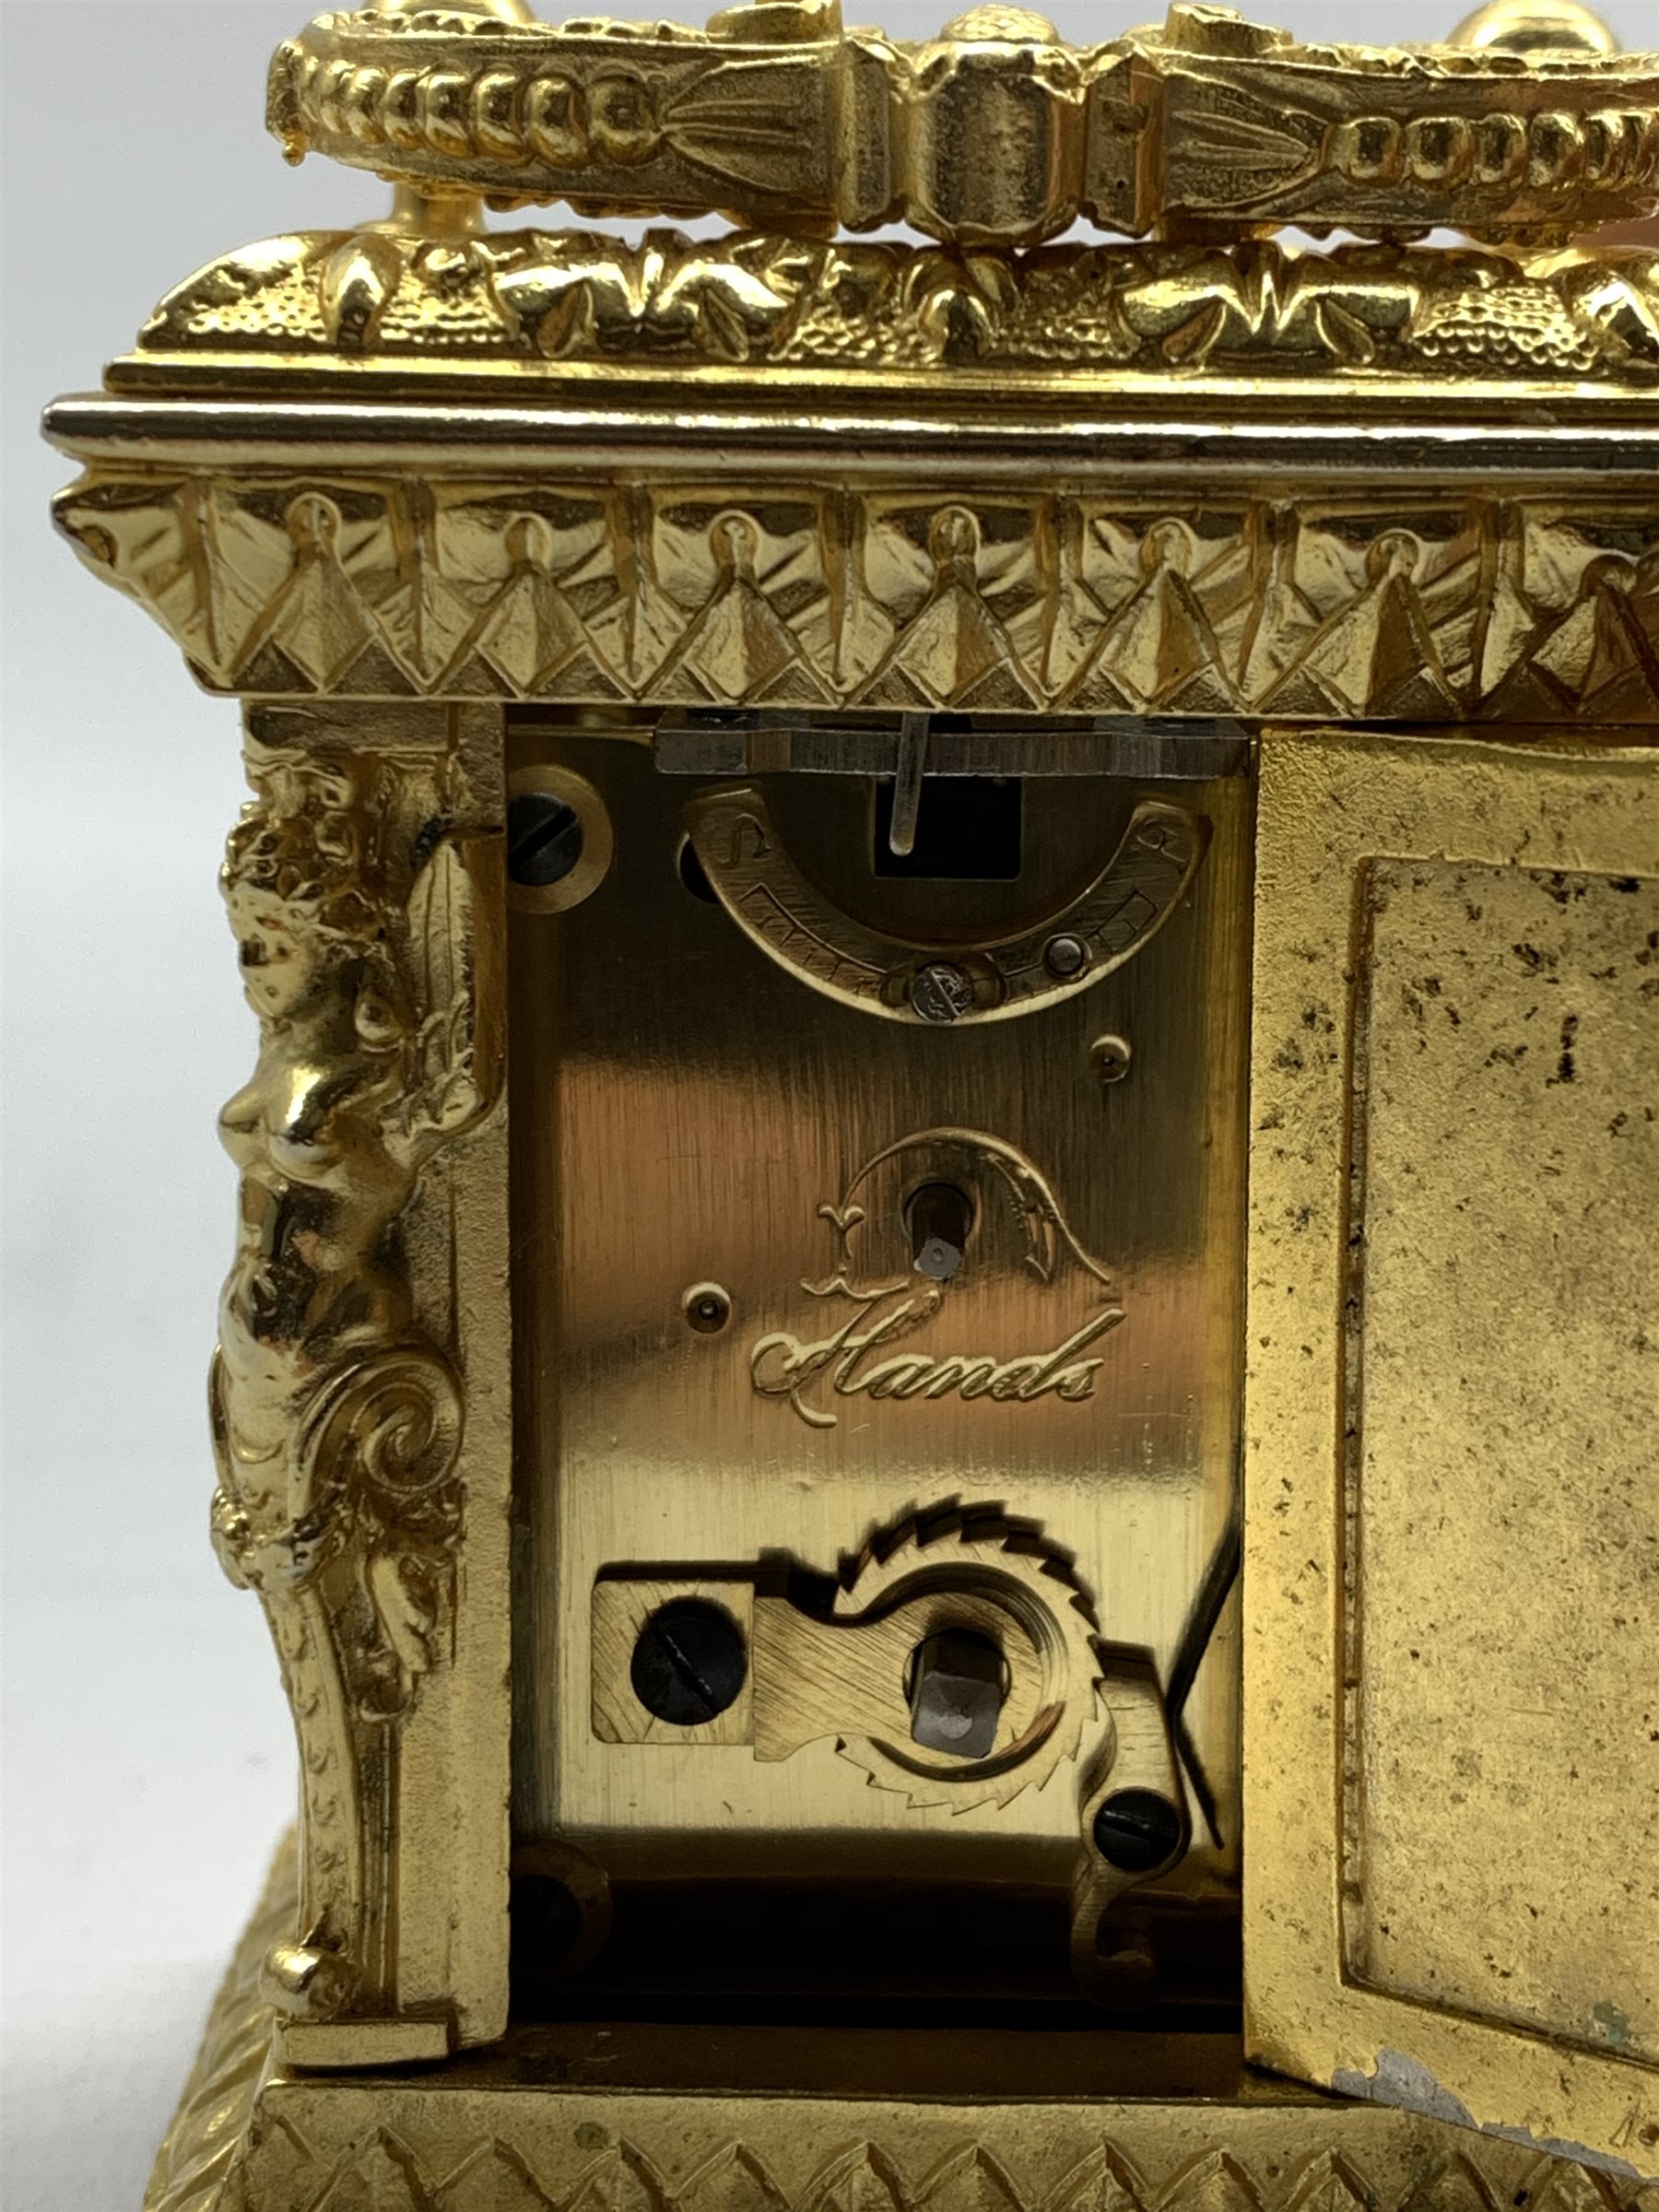 20th century miniature ornate brass carriage time piece, white enamel dial with Roman numeral chapt - Image 3 of 3